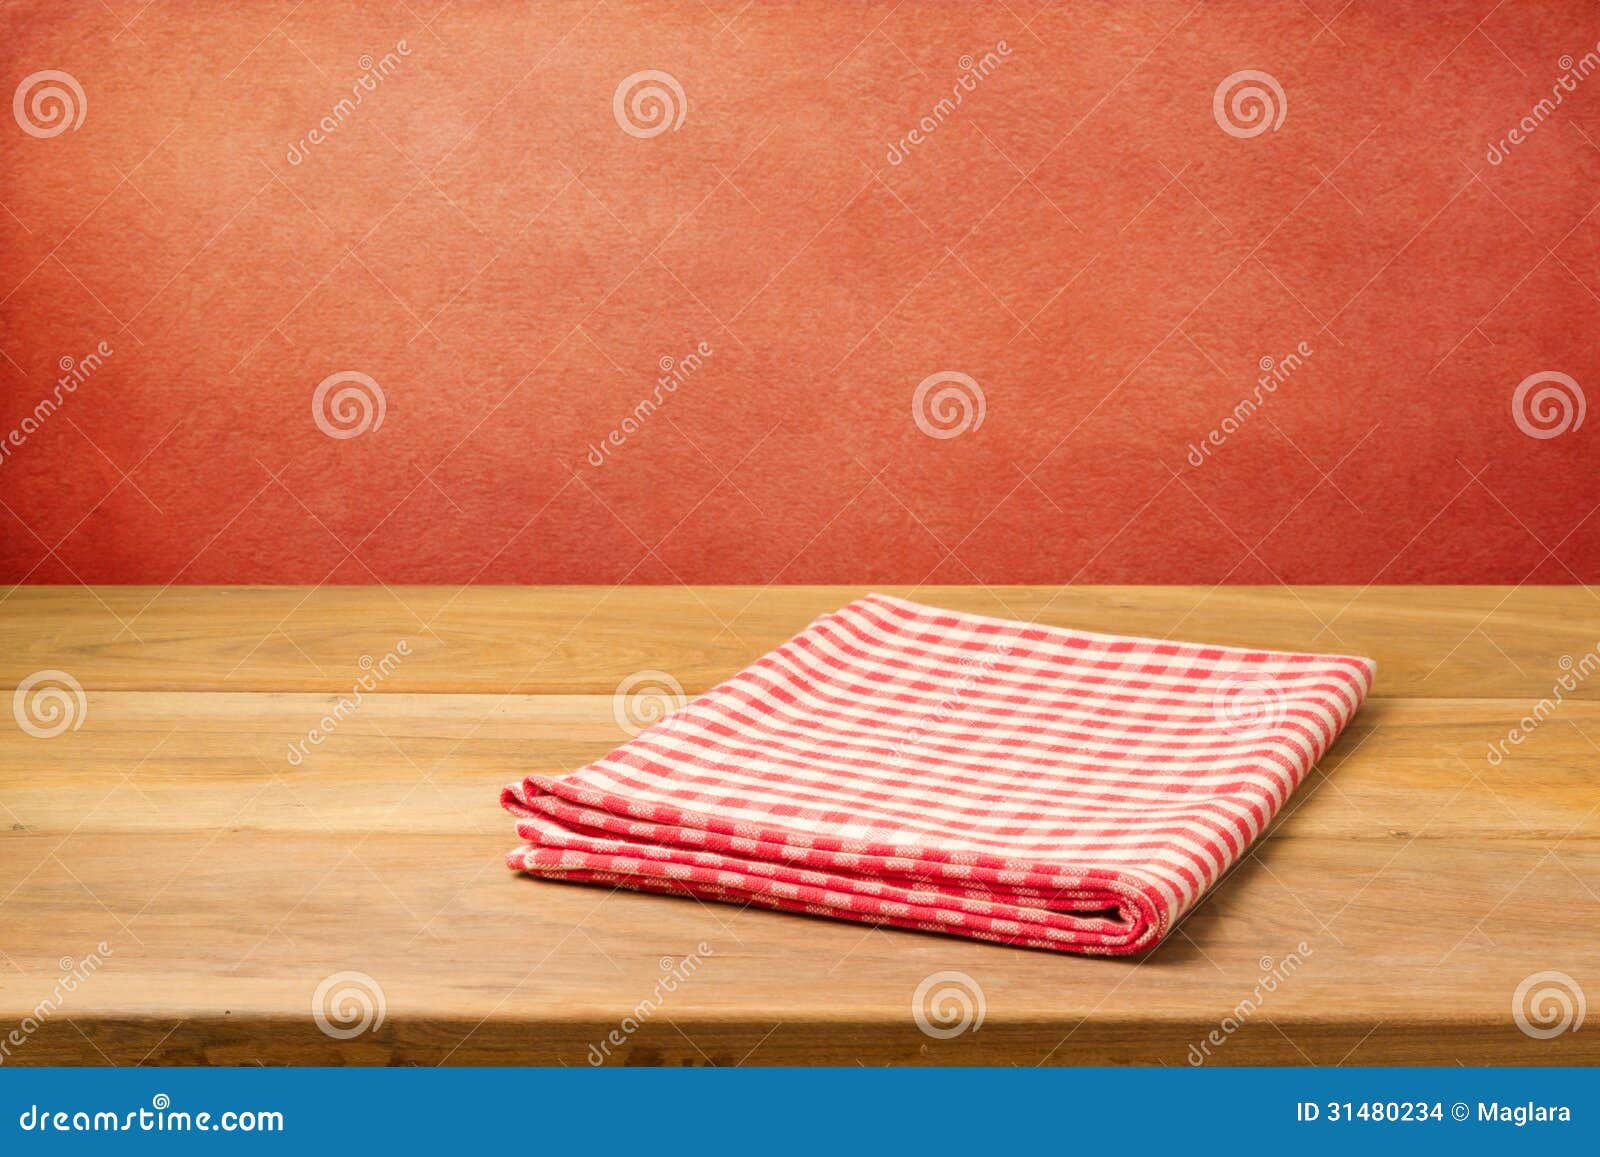 empty wooden table with checked tablecloth over grunge red concrete wall.